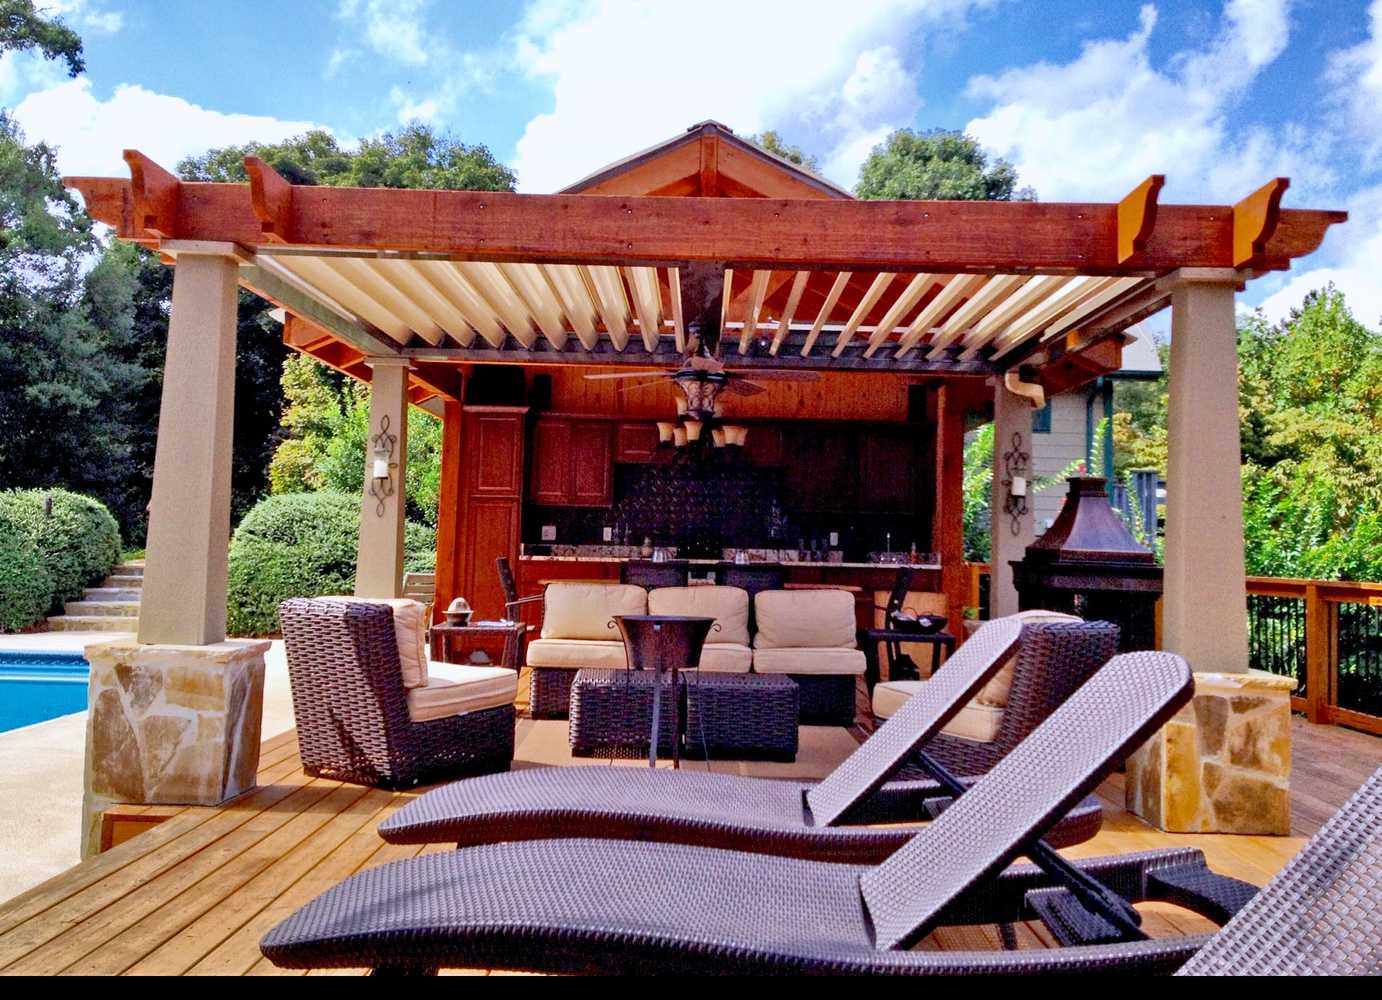 Photo(s) from Adjustable Patio Covers - North East, Llc